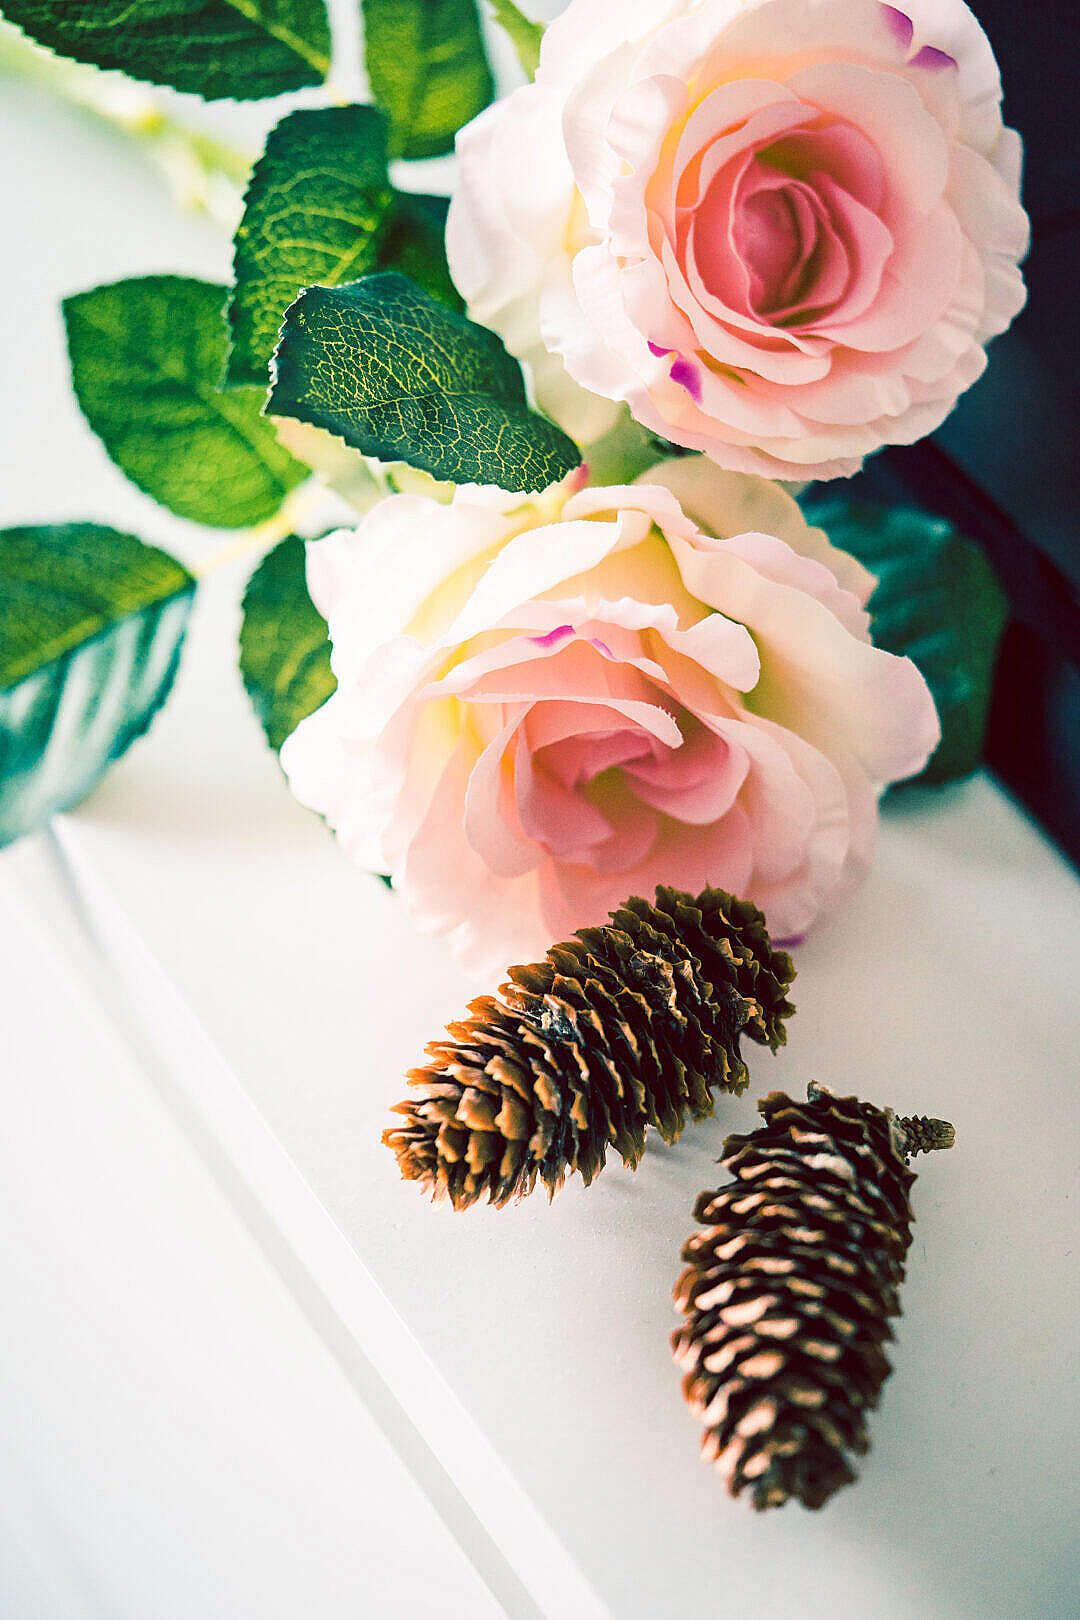 Download Autumn Feeling: Roses and Cones FREE Stock Photo